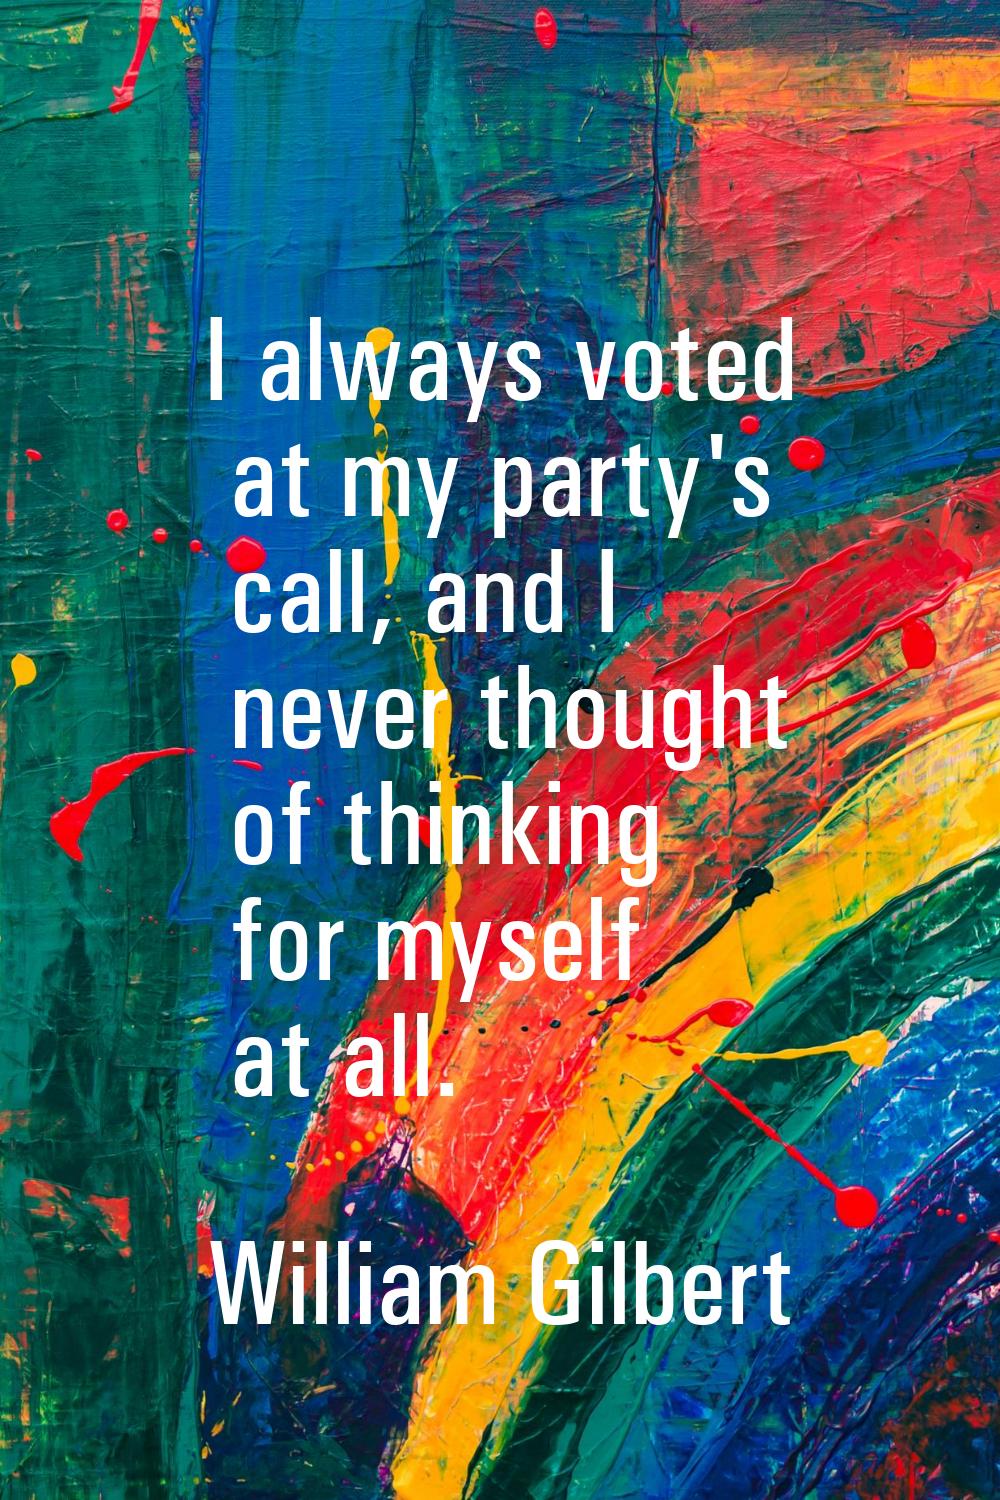 I always voted at my party's call, and I never thought of thinking for myself at all.